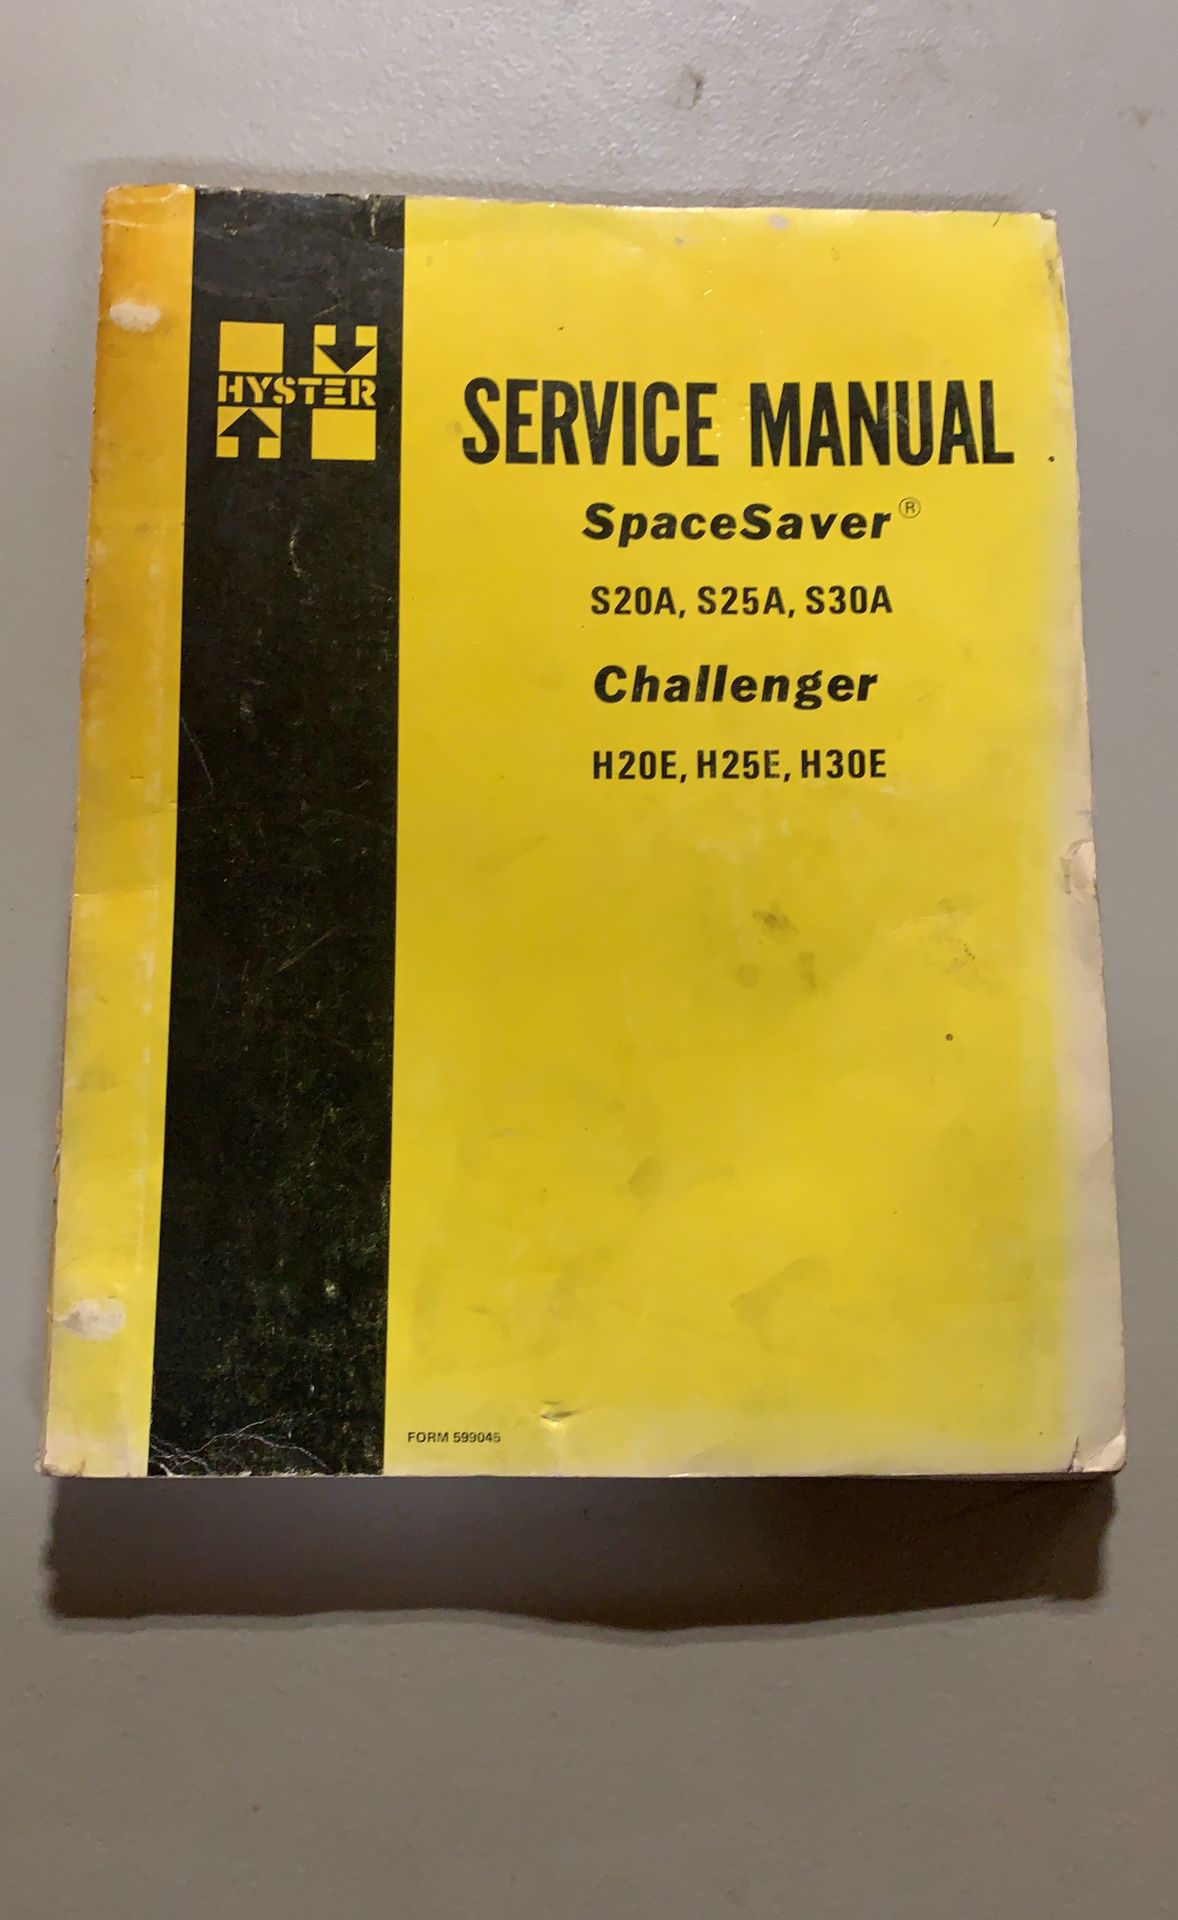 Hyster Challenger Parts And Service Manual